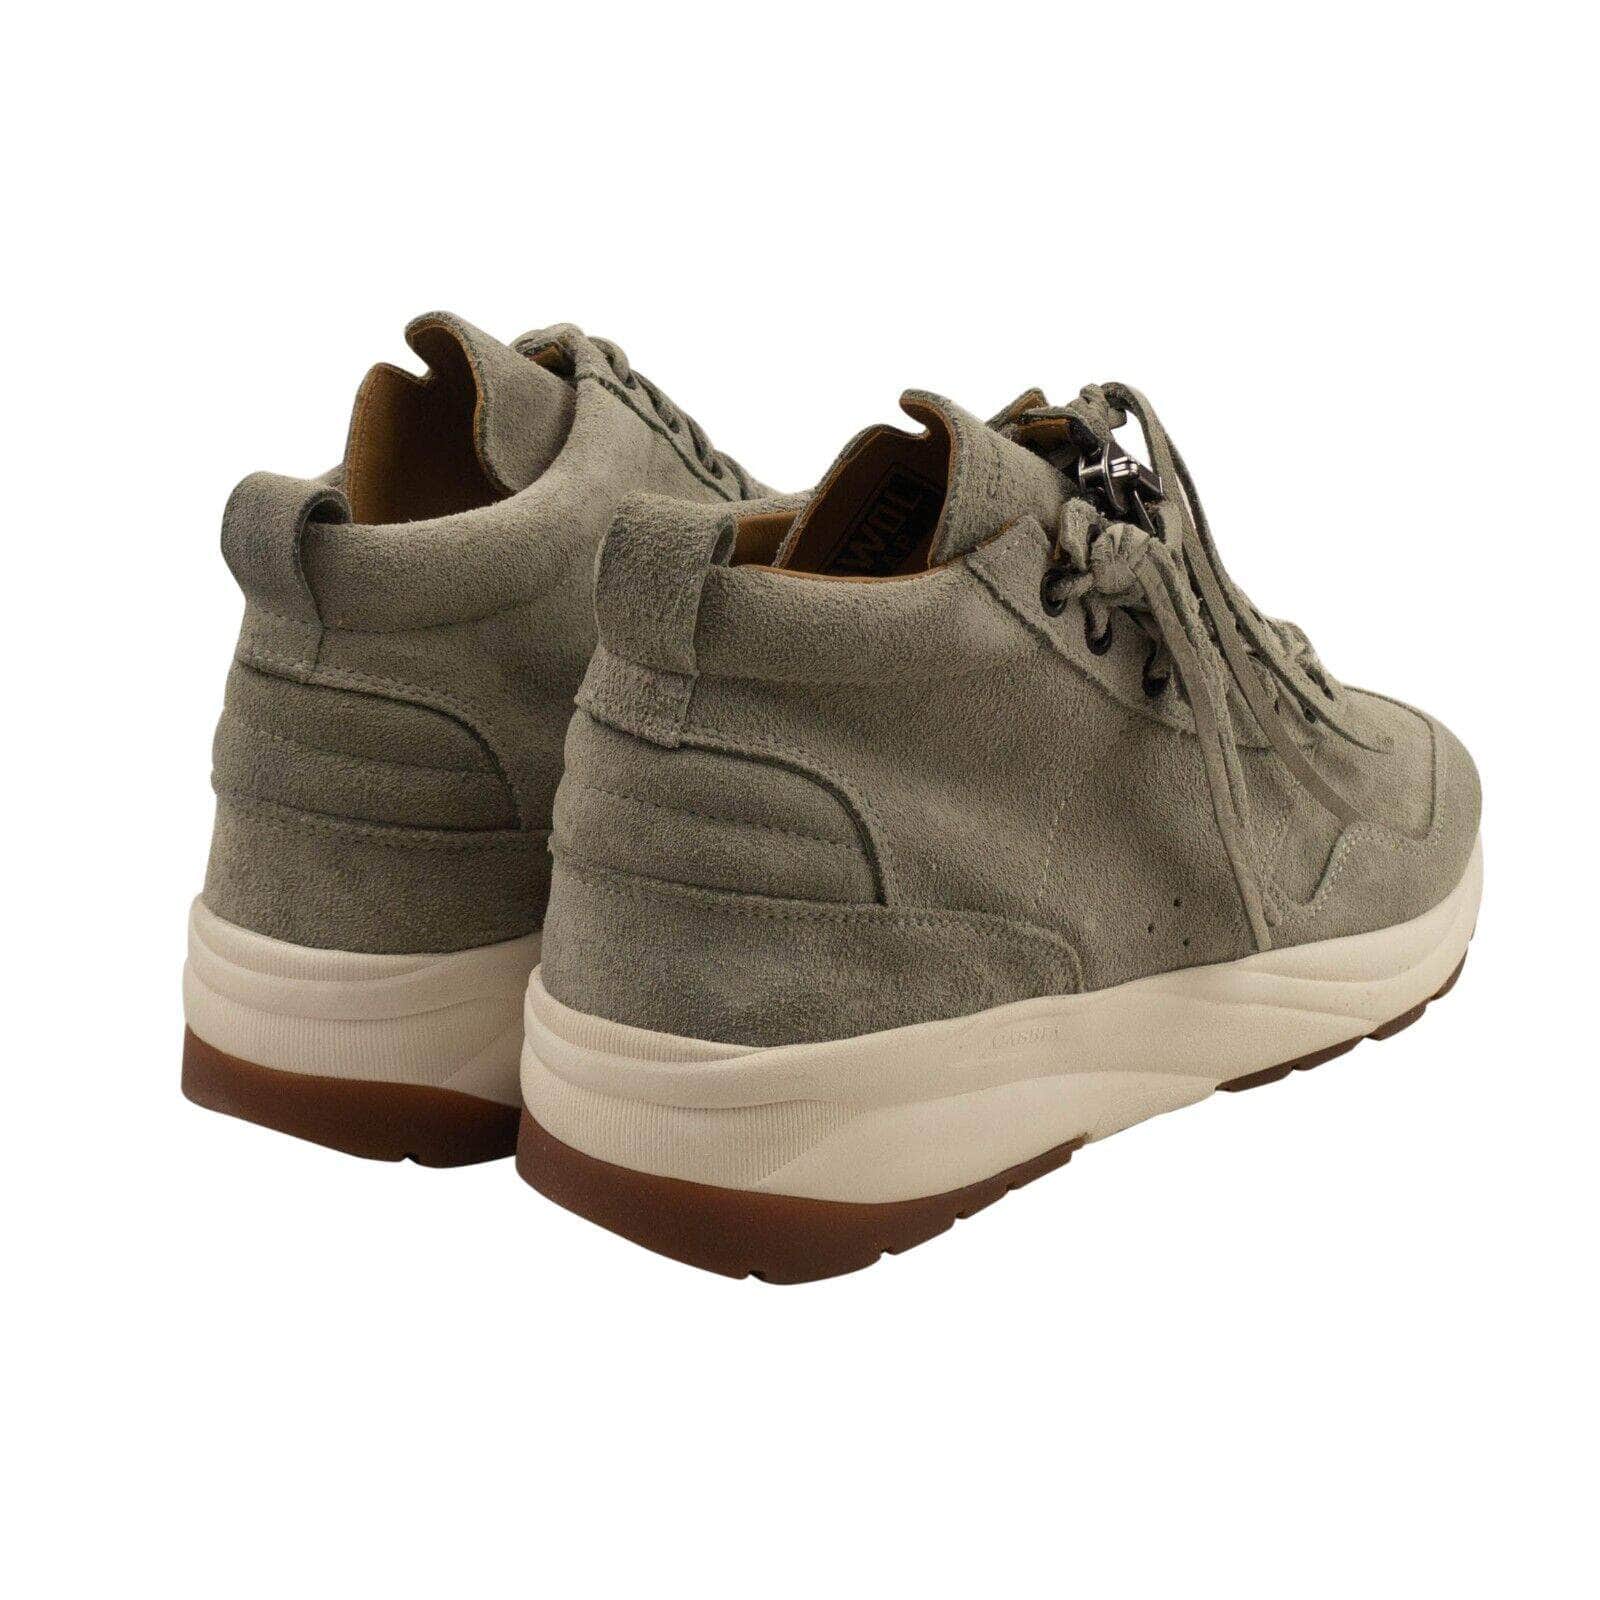 Casbia casbia, channelenable-all, chicmi, couponcollection, gender-mens, main-shoes, mens-shoes, MixedApparel, size-40, size-41, size-42, size-43, size-44, size-45, size-46, under-250 Sand Gray AWOL AP Lace Up Sneakers